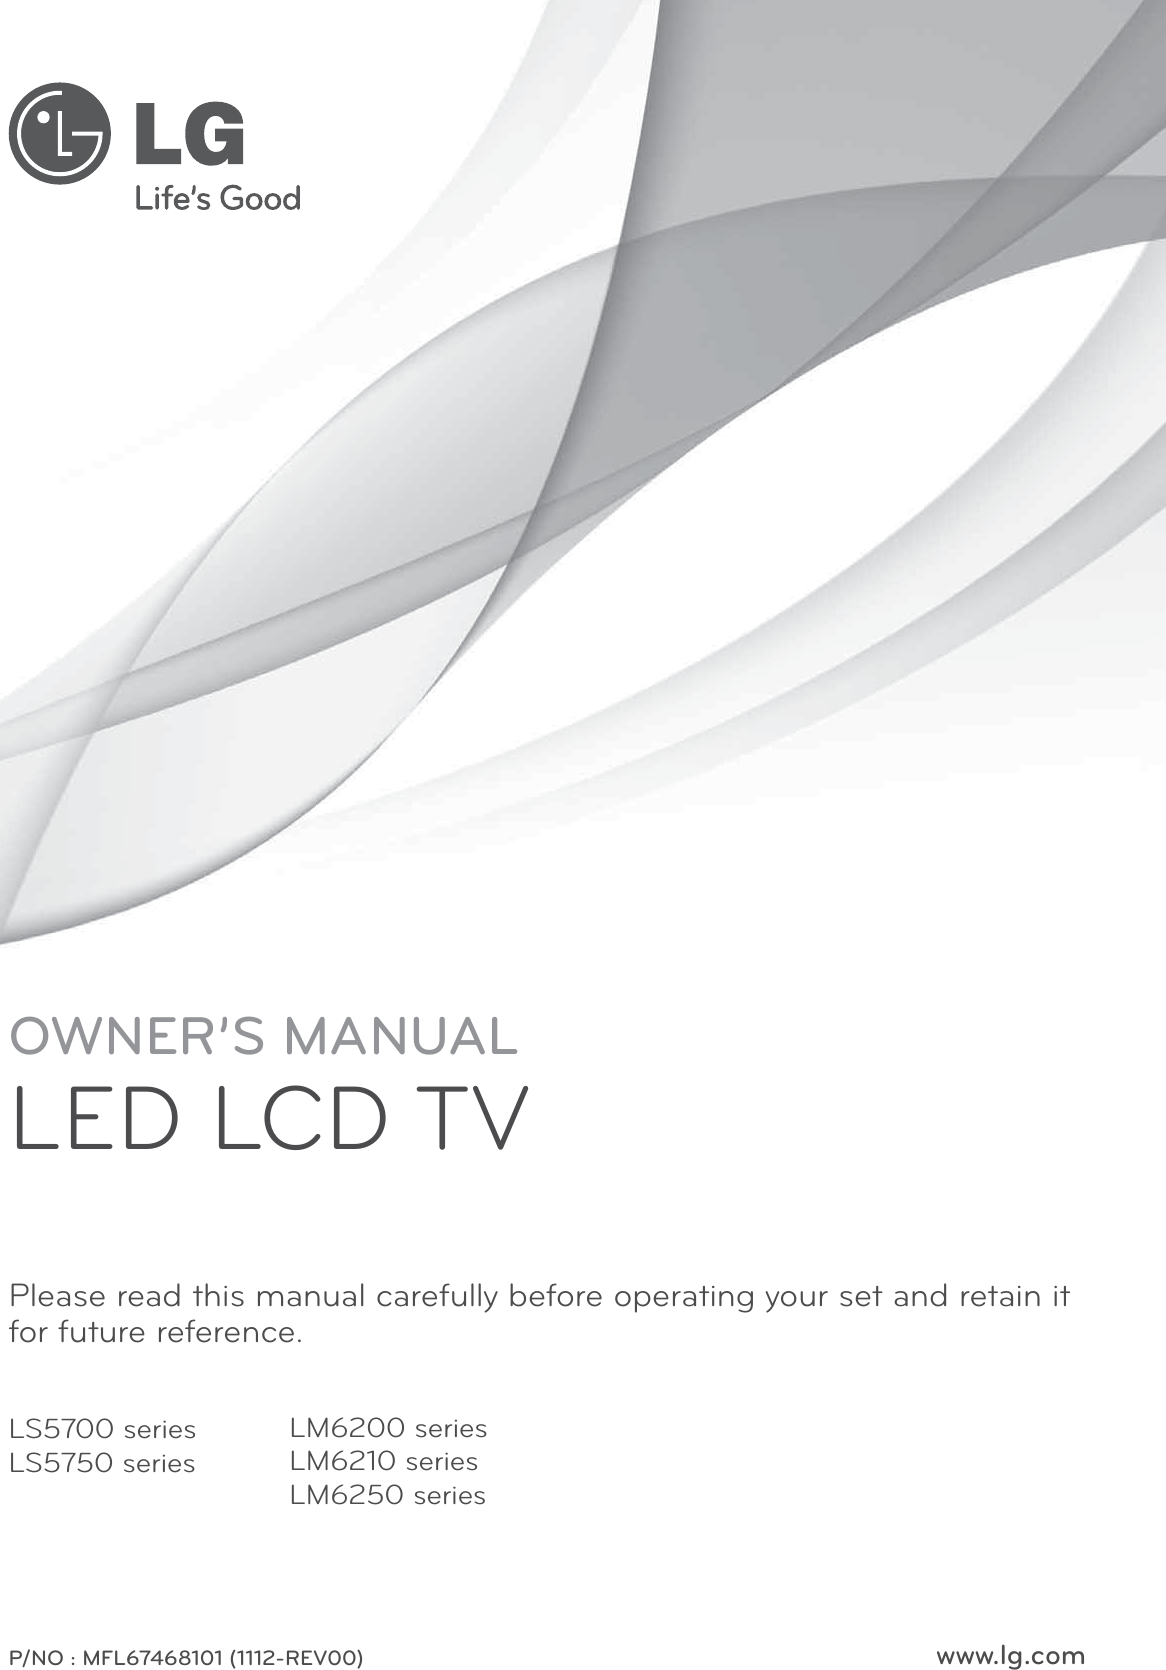 www.lg.comOWNER’S MANUALLED LCD TVPlease read this manual carefully before operating your set and retain it for future reference.LS5700 seriesLS5750 seriesP/NO : MFL67468101 (1112-REV00)LM6200 seriesLM6210 seriesLM6250 series